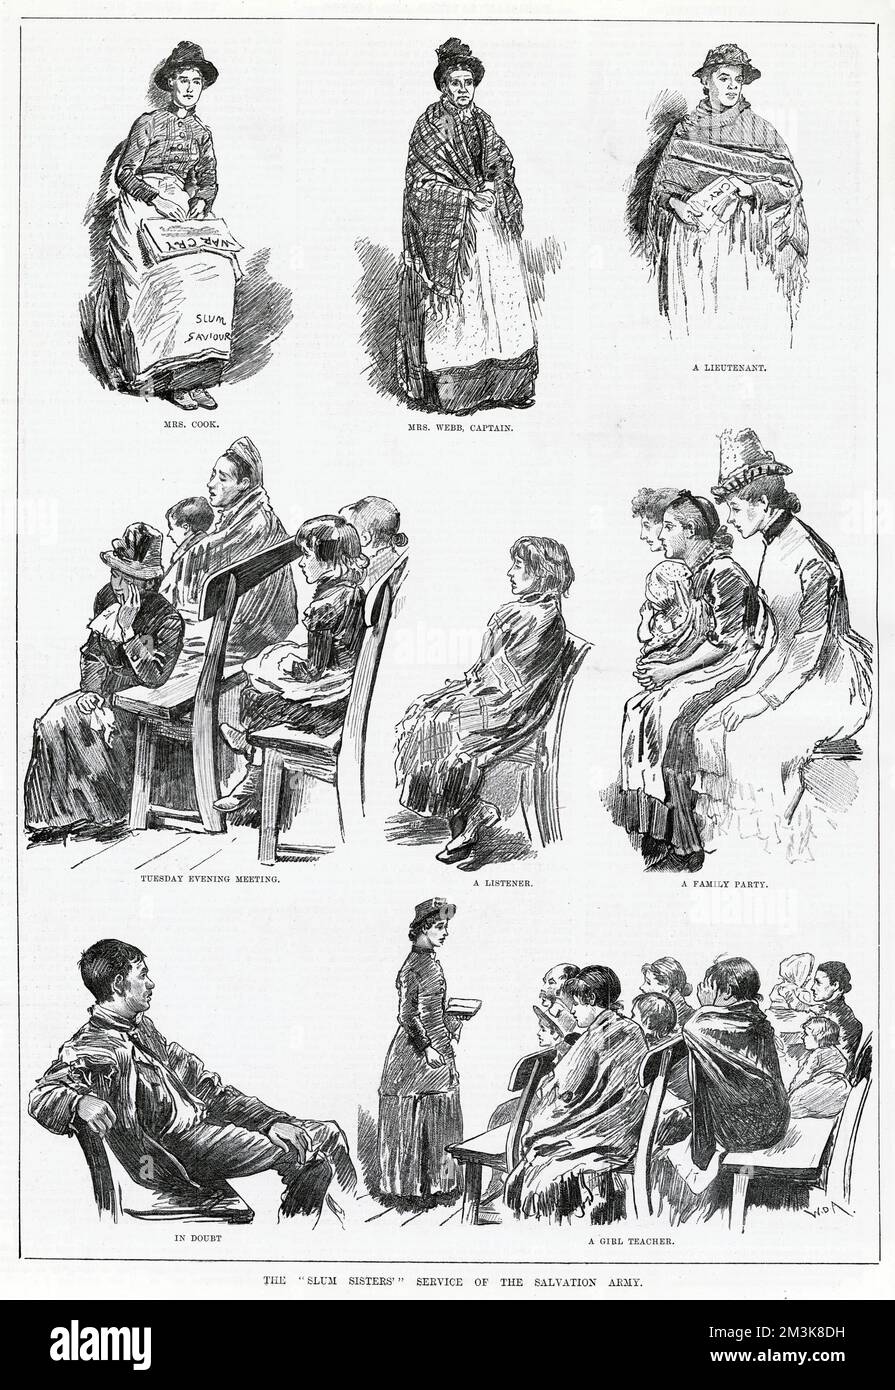 The top three images show members of the Salvation Army who, described as 'slum saviours', went to live with the poorest London people to help and provide for them. This was seen as a way to save drunkards and fallen women and reach them with Christianity. Stock Photo